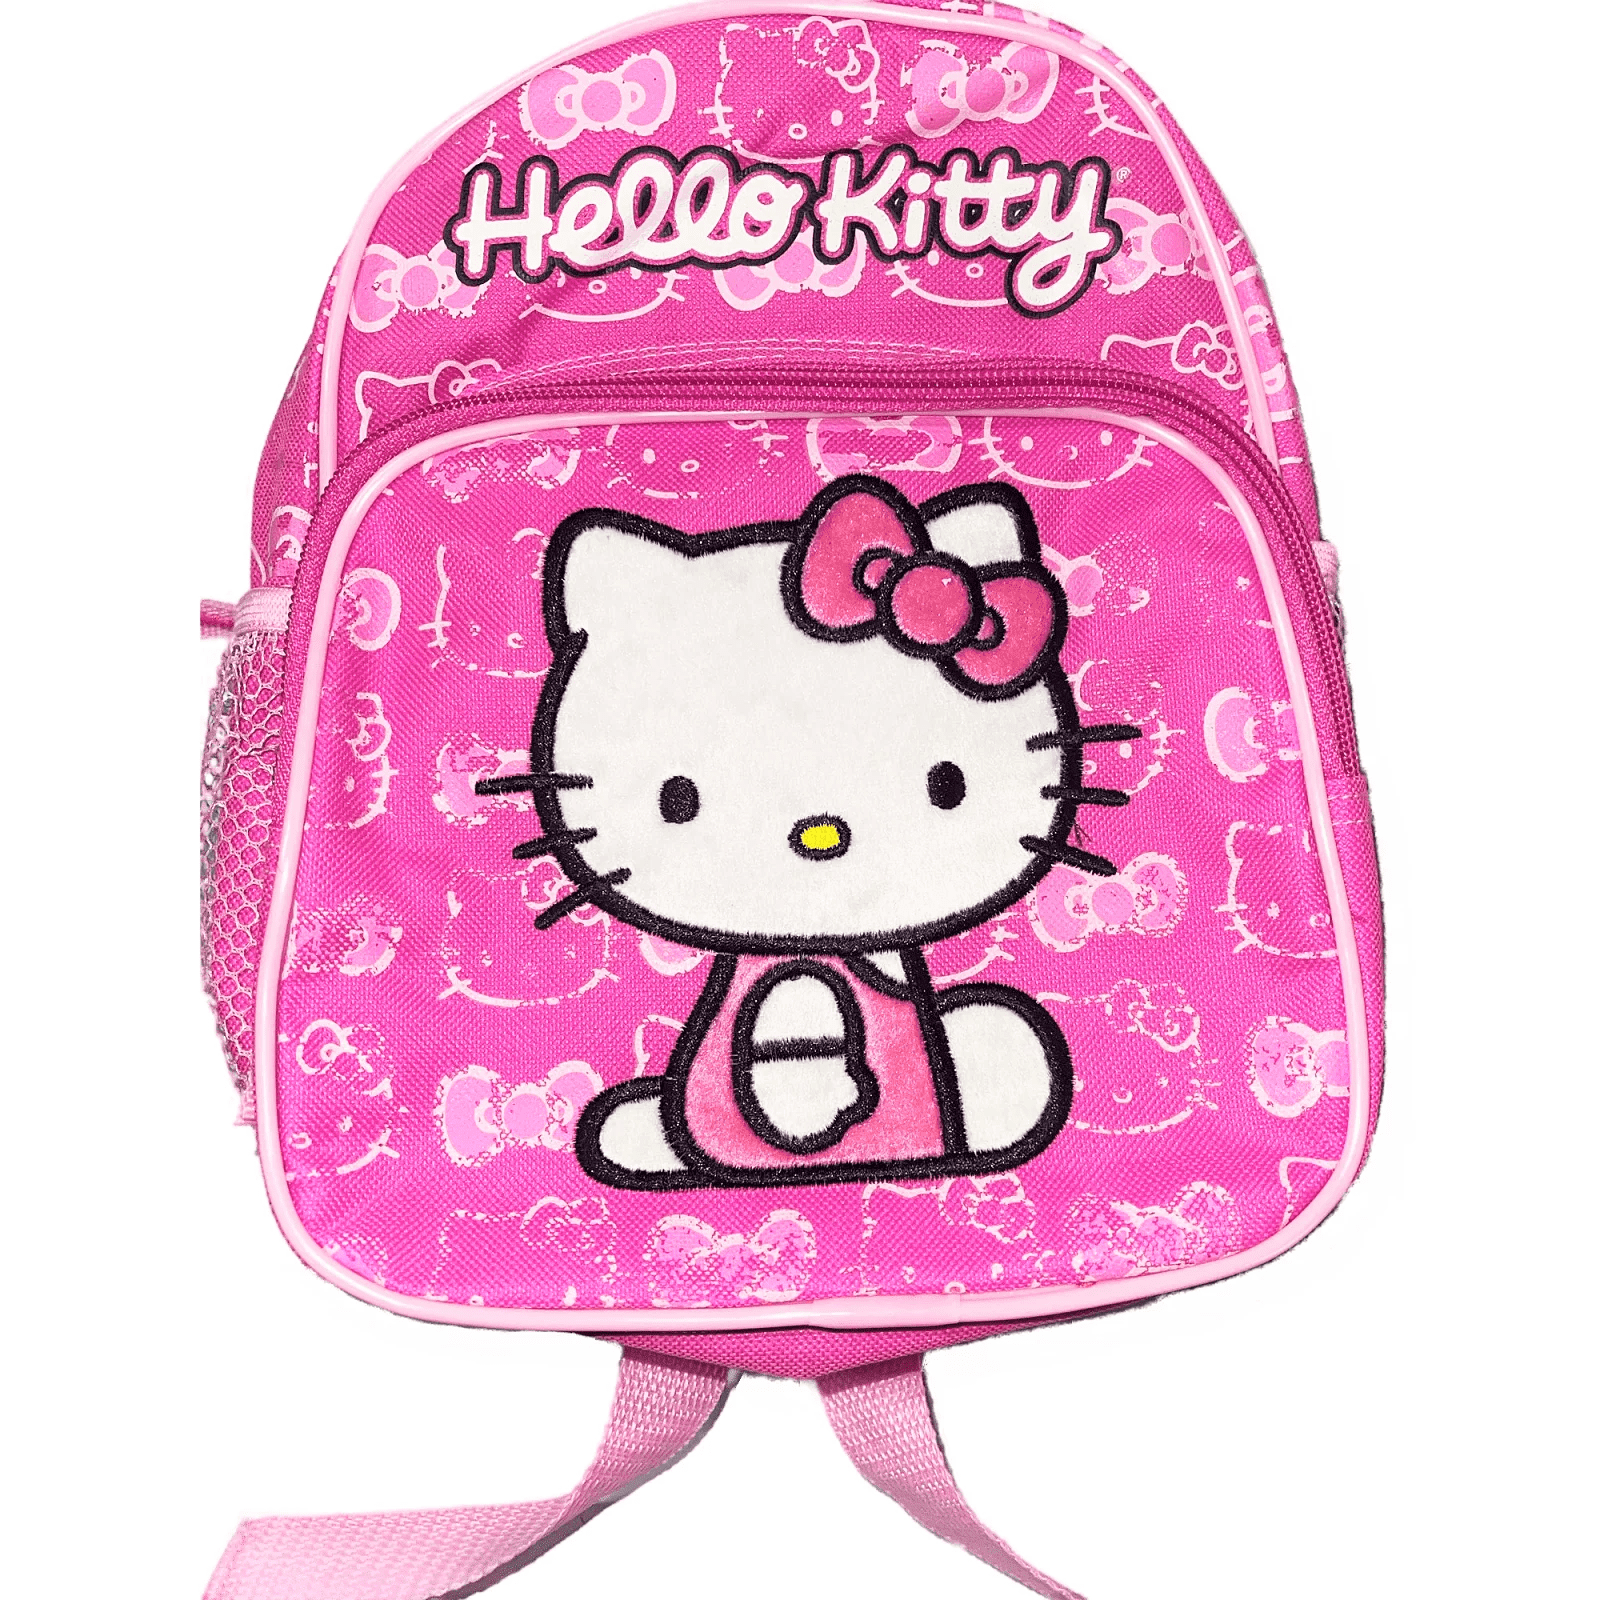 Mini Backpack - Hello Kitty - Pink Kitty Head & Bows 10 inch New School Bag 824997, Girl's, Size: 10H x 8W x 4.25D